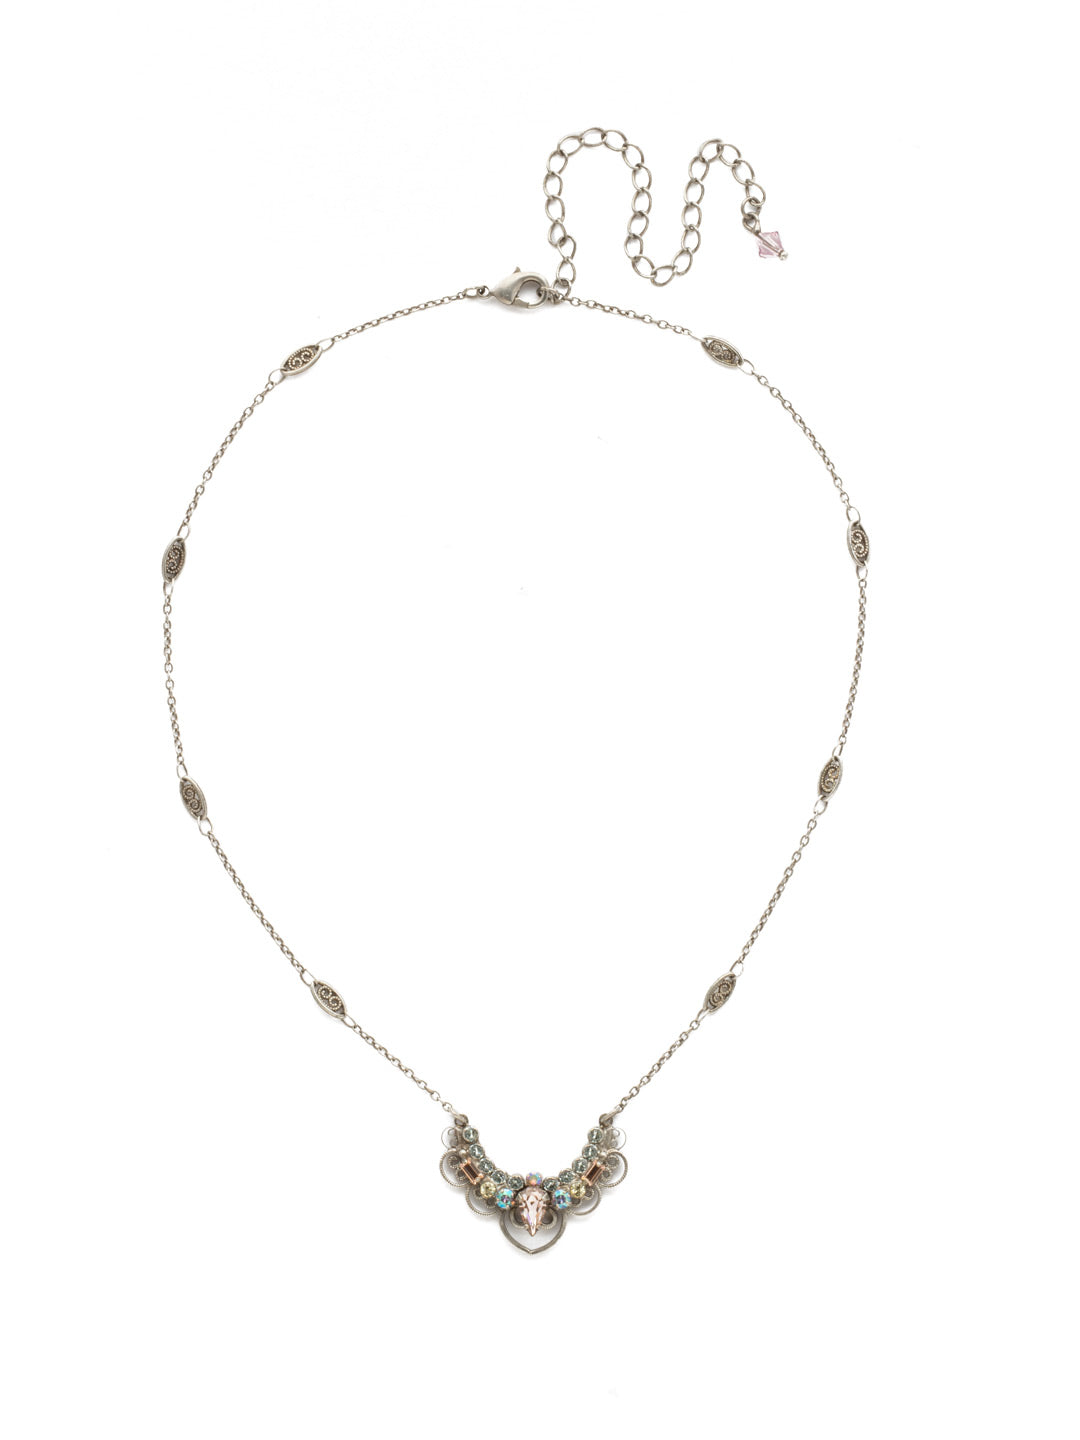 Moonflower Necklace - NDU21ASLPA - Features a ribbed chain enclosed by a ball and chain clasp with a crescent of crystals in round, navette, and square to form a pendant.